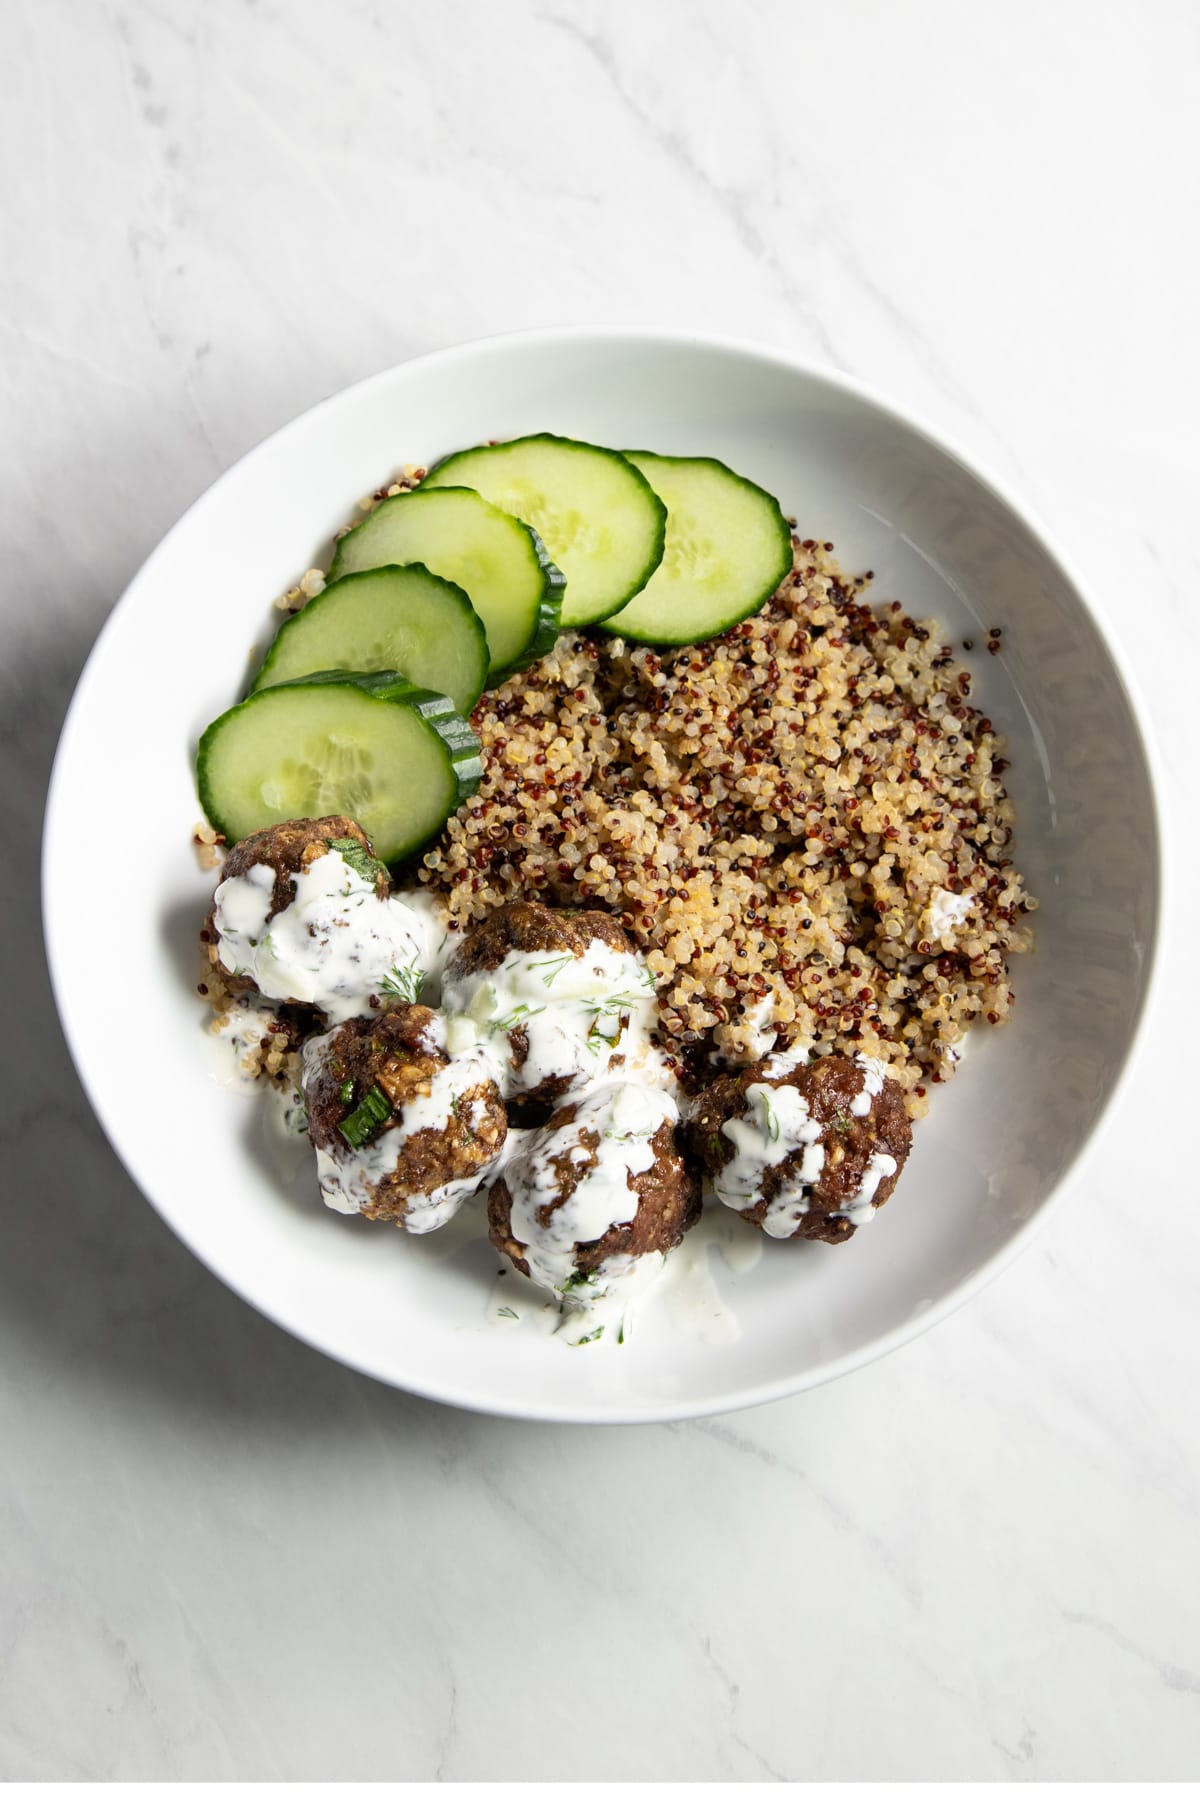 A shallow bowl filled with cooked quinoa, low FODMAP Greek meatballs topped with a creamy dill sauce, and a few cucumber slices on the side.